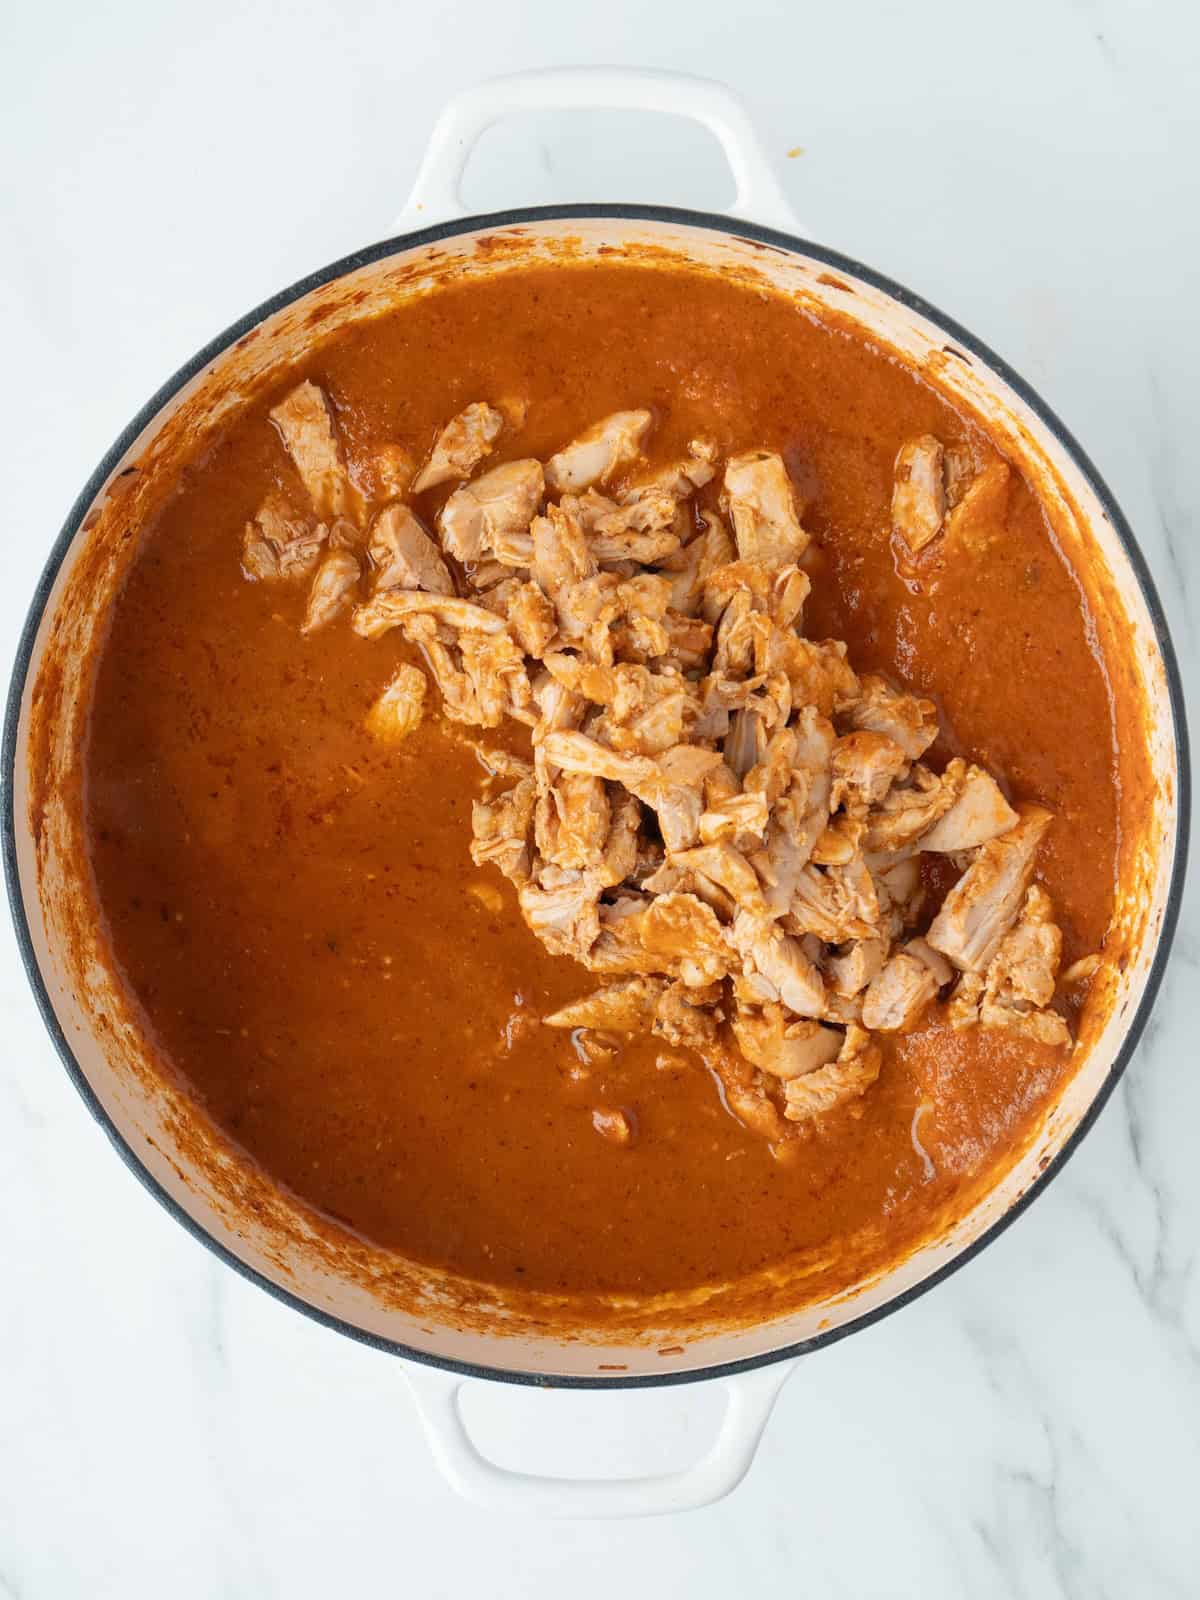 A dutch oven with the chipotle tomato sauce, and cooked chicken cut into strips added, which is the final chicken tinga.